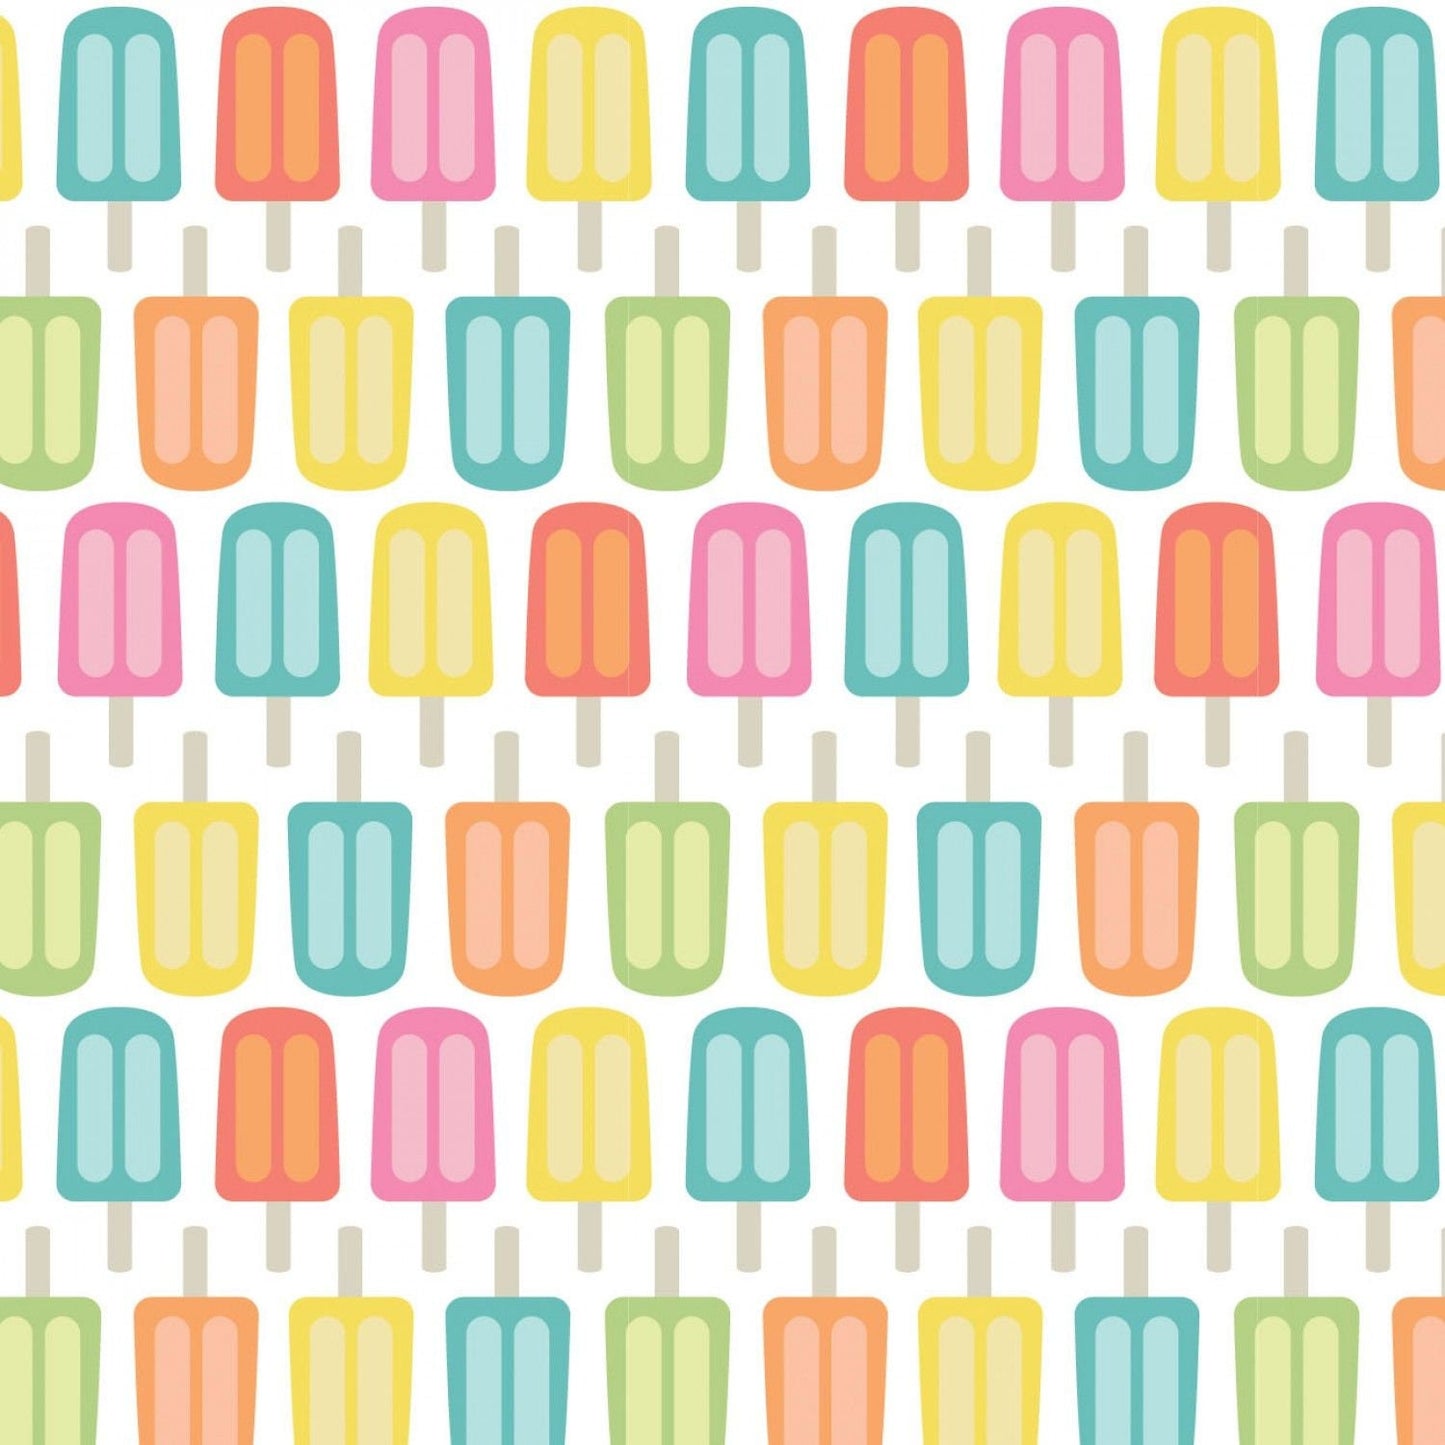 Be The Rainbow Popsicles Bright White21200404-1 Cotton Woven Fabric